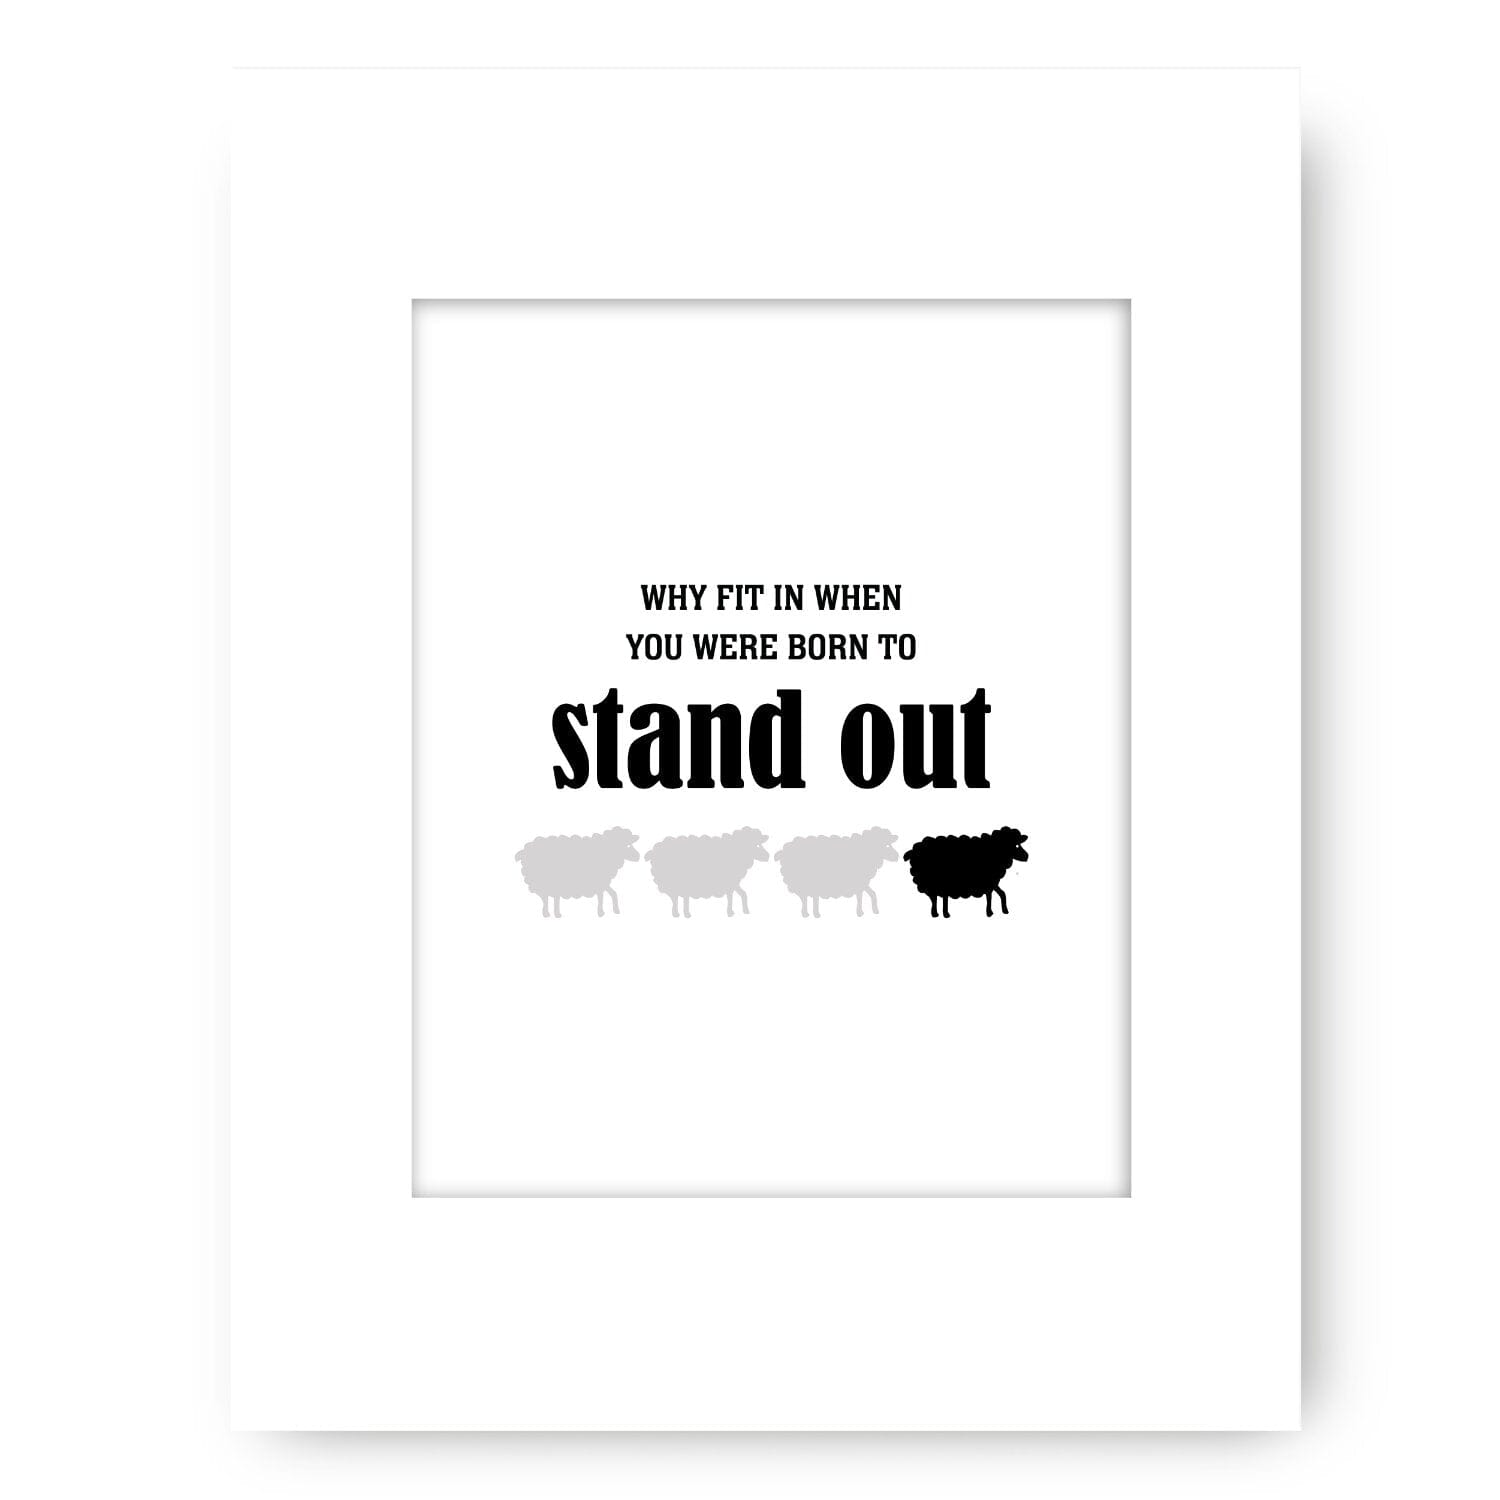 Why Fit in When You Were Born to Stand Out - Wise and Witty Print Wise and Wiseass Quotes Song Lyrics Art 8x10 White Matted Print 